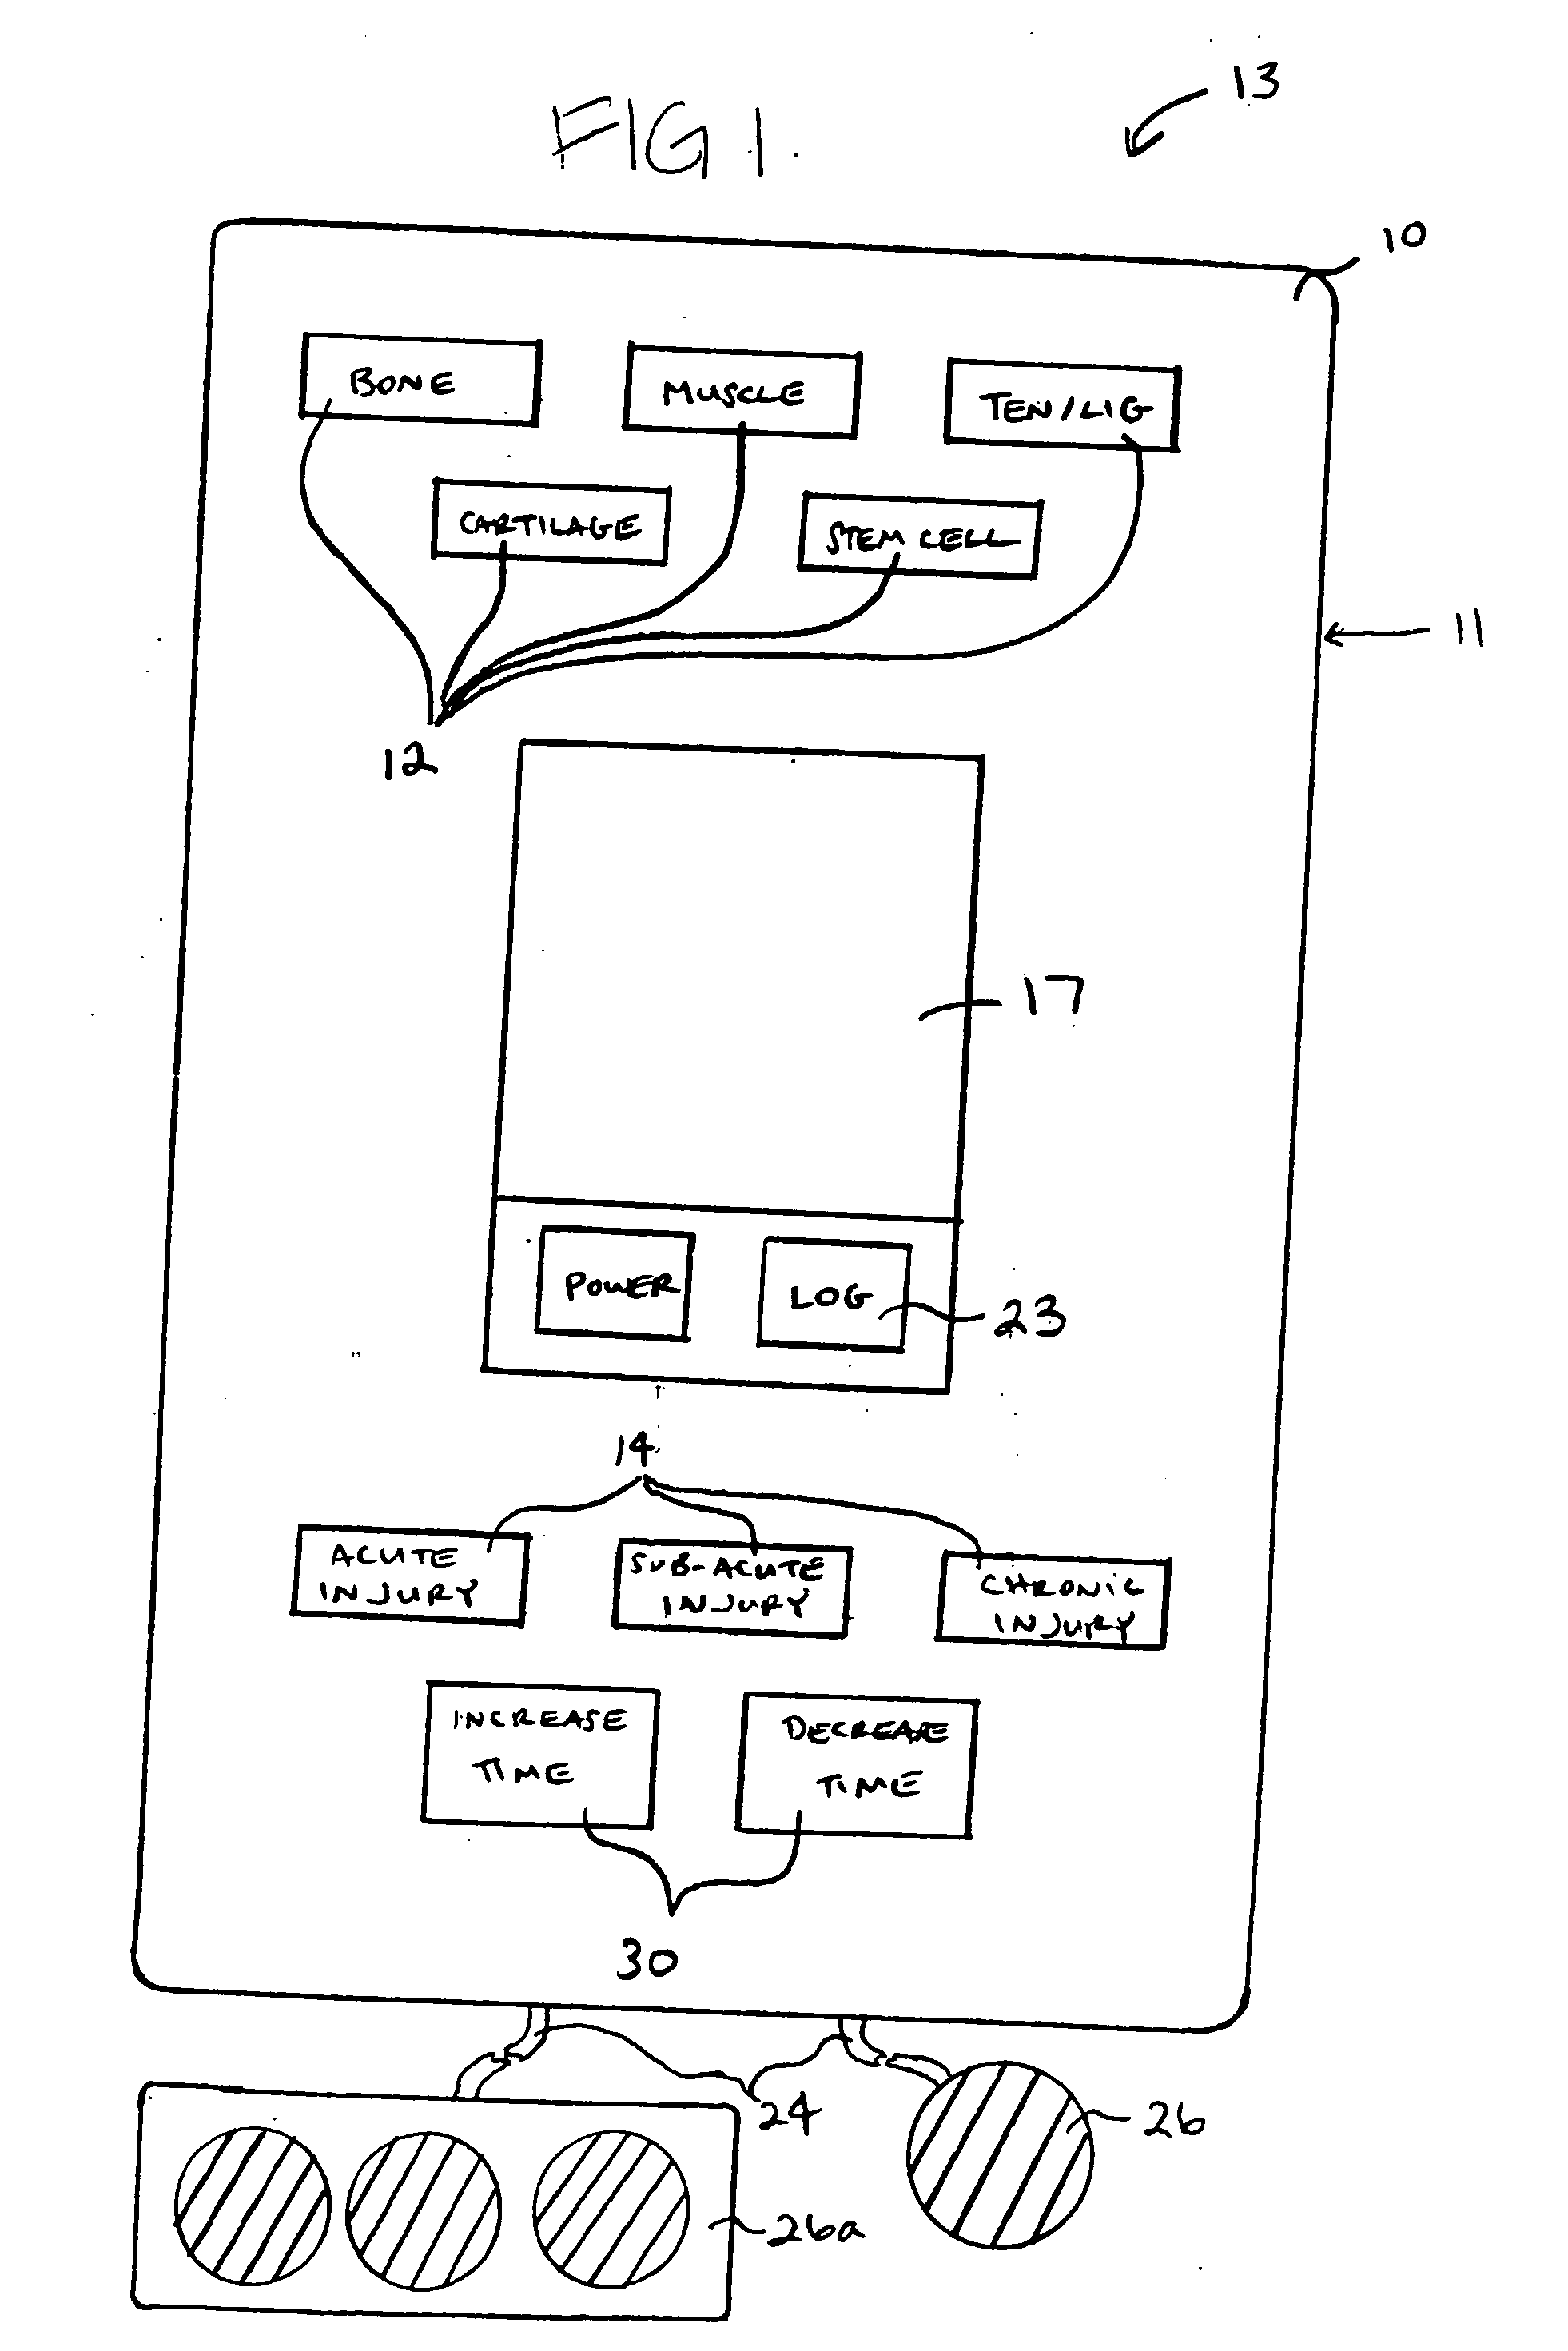 Apparatus and method for the static application of therapeutic ultrasound and stem cell therapy of living tissues